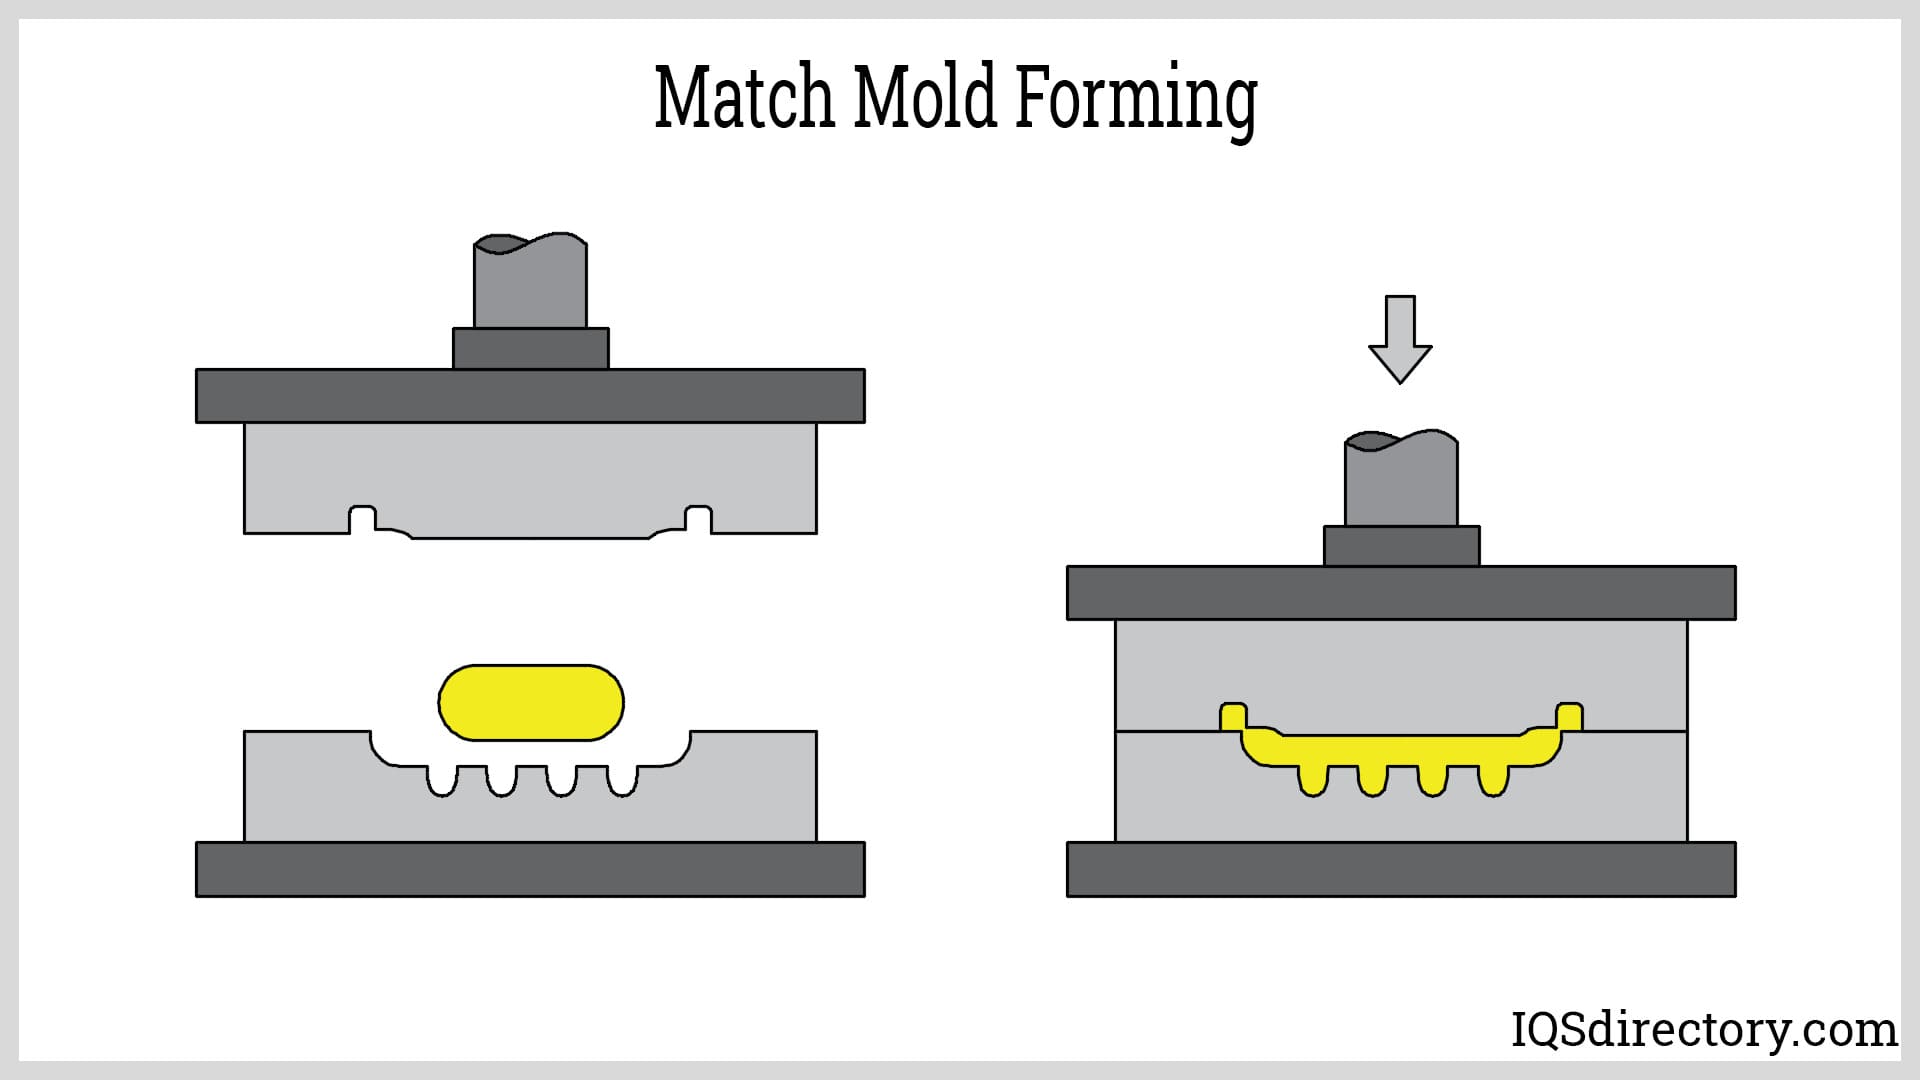 Match Mold Forming